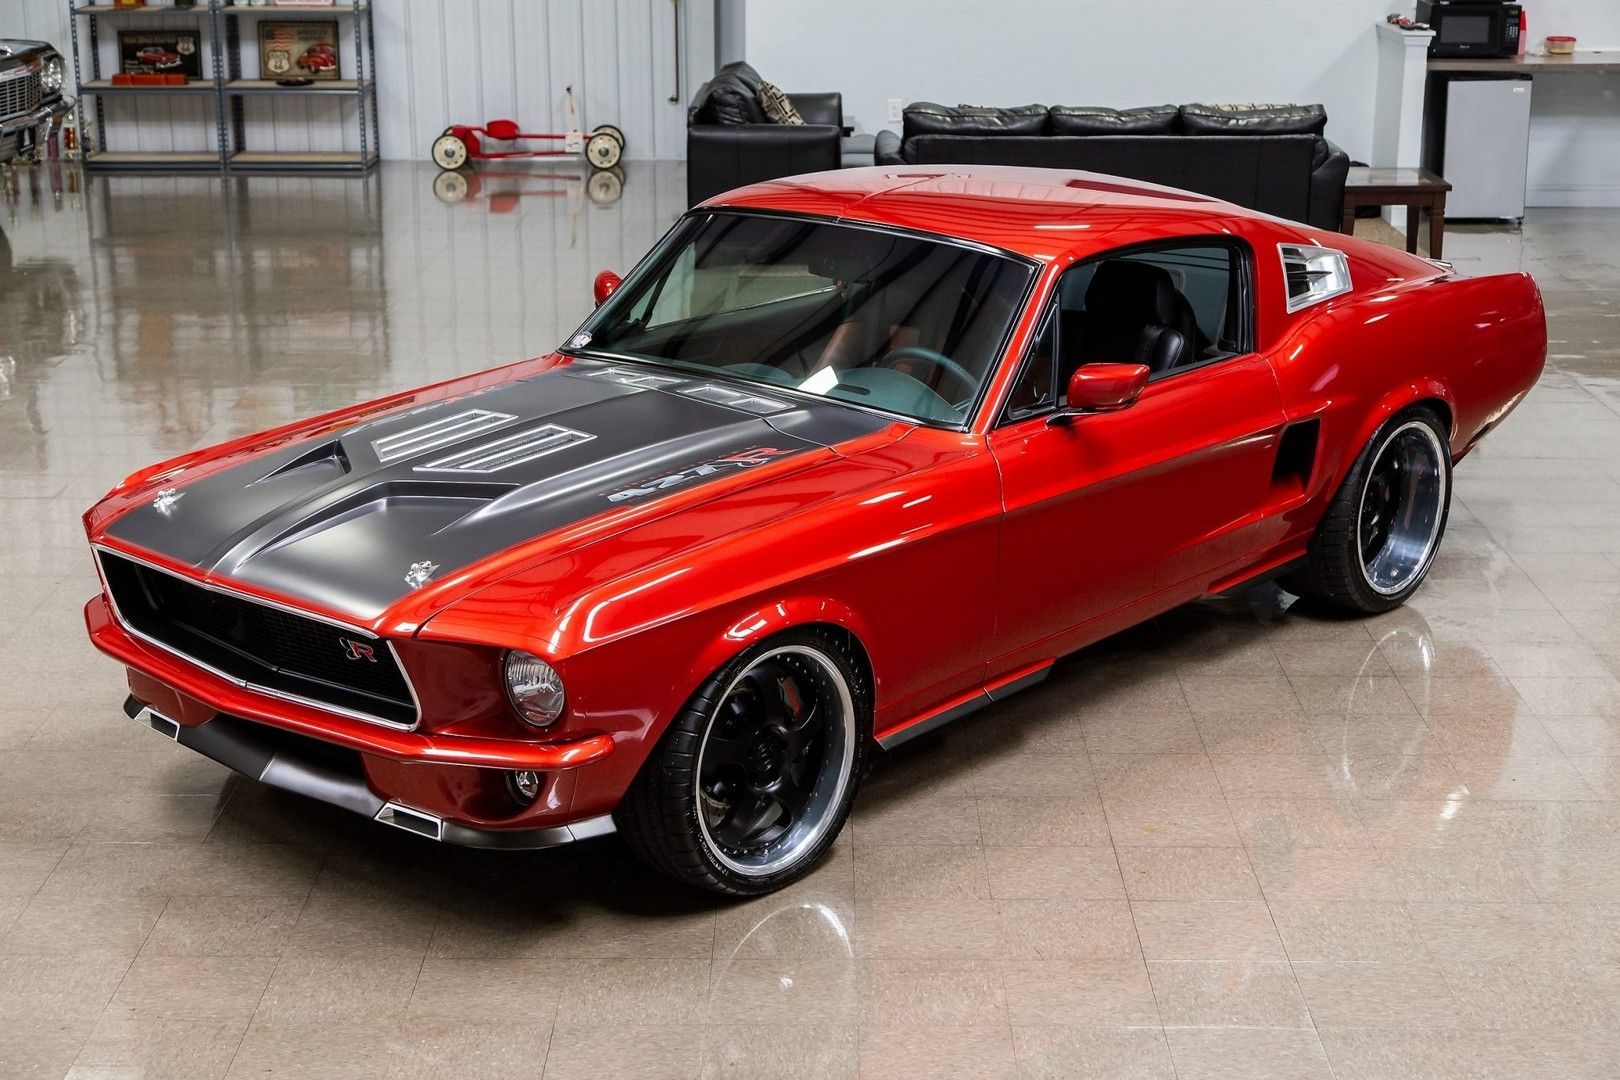 Snag This Superb Ringbrothers 1967 Ford Mustang Restomod 'Copperback'